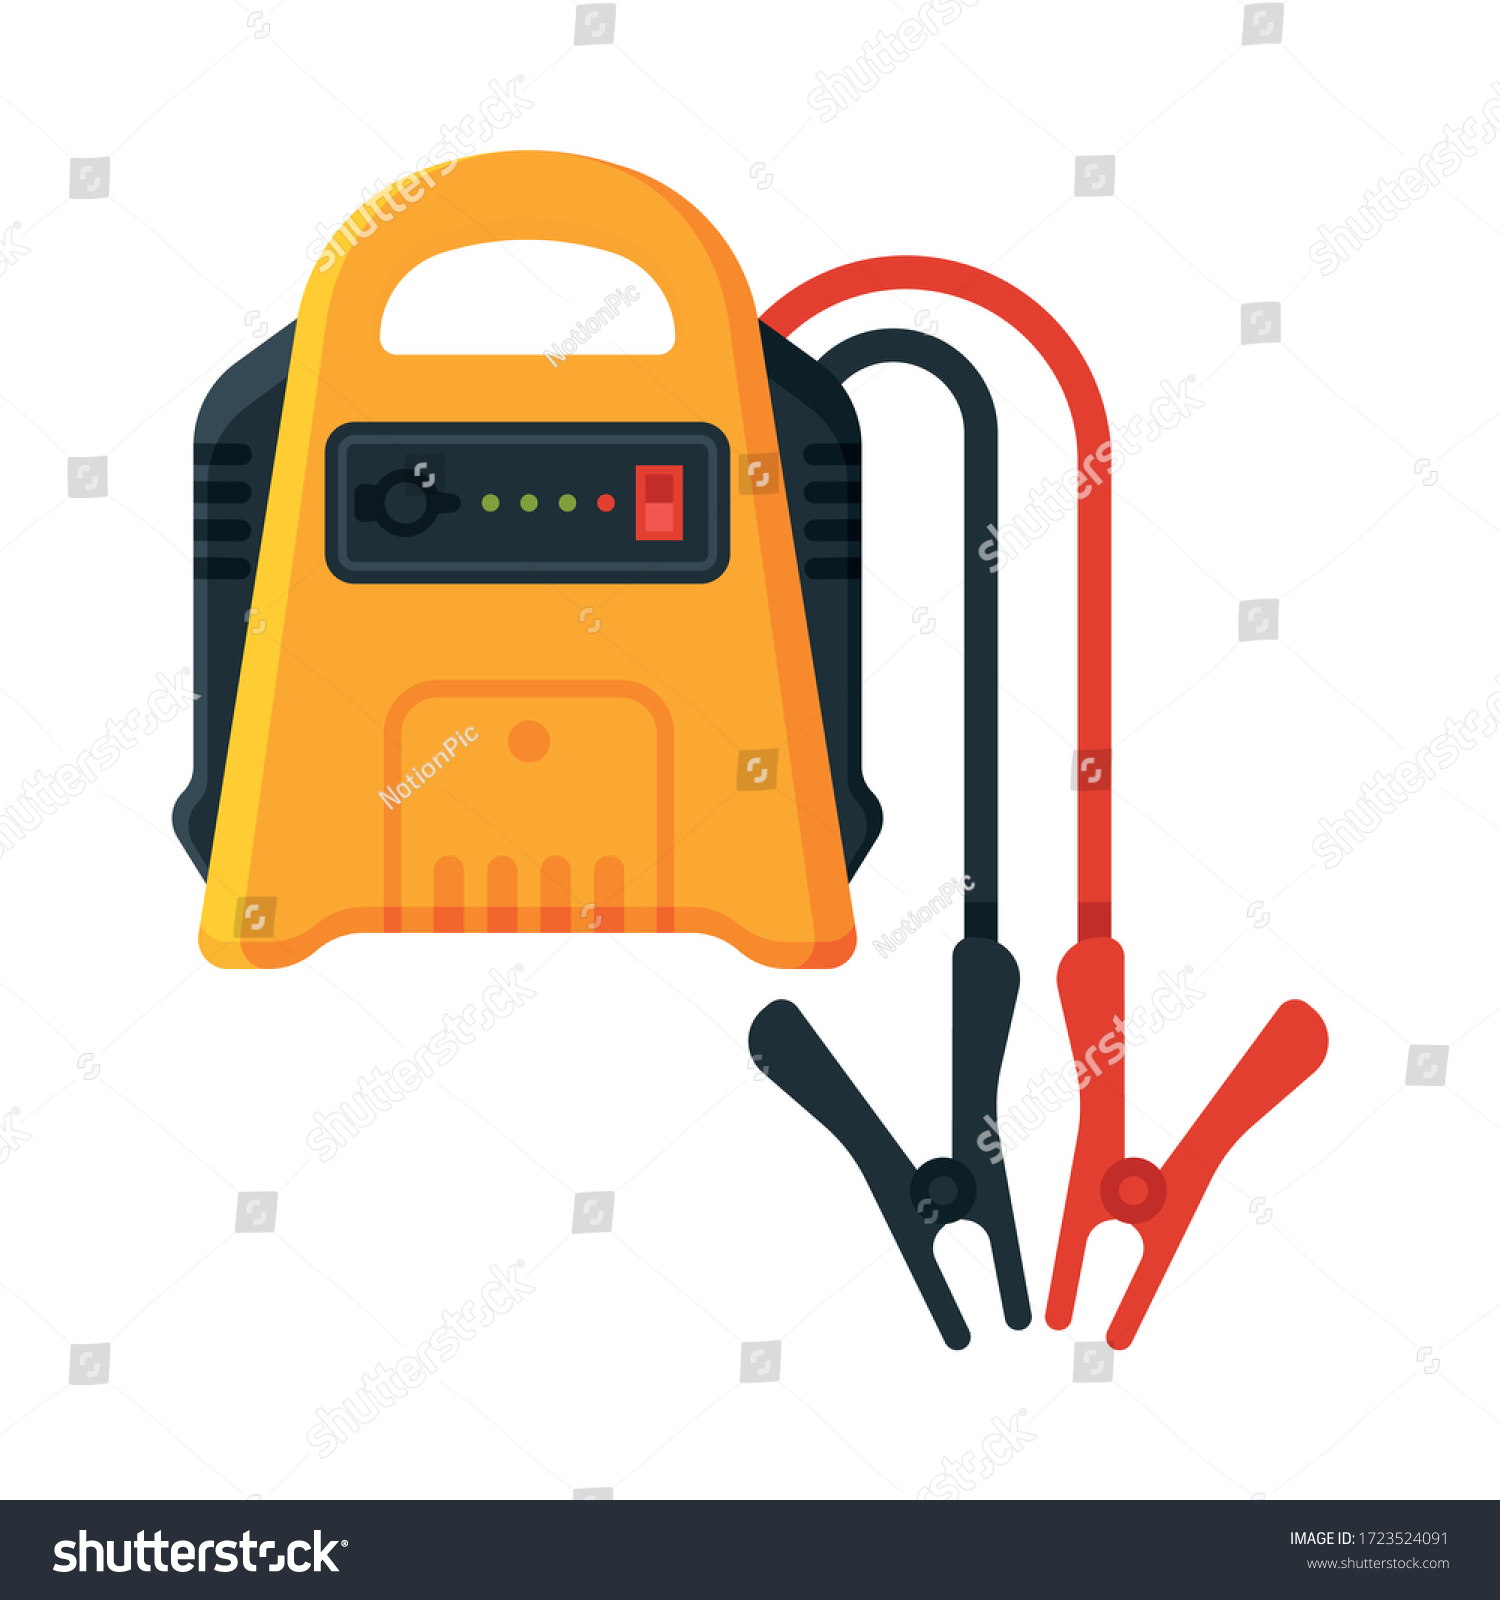 SVG of Battery with Electrical Clips, Jump Start Vehicle Cable, Battery Charger Terminal Vector Illustration svg